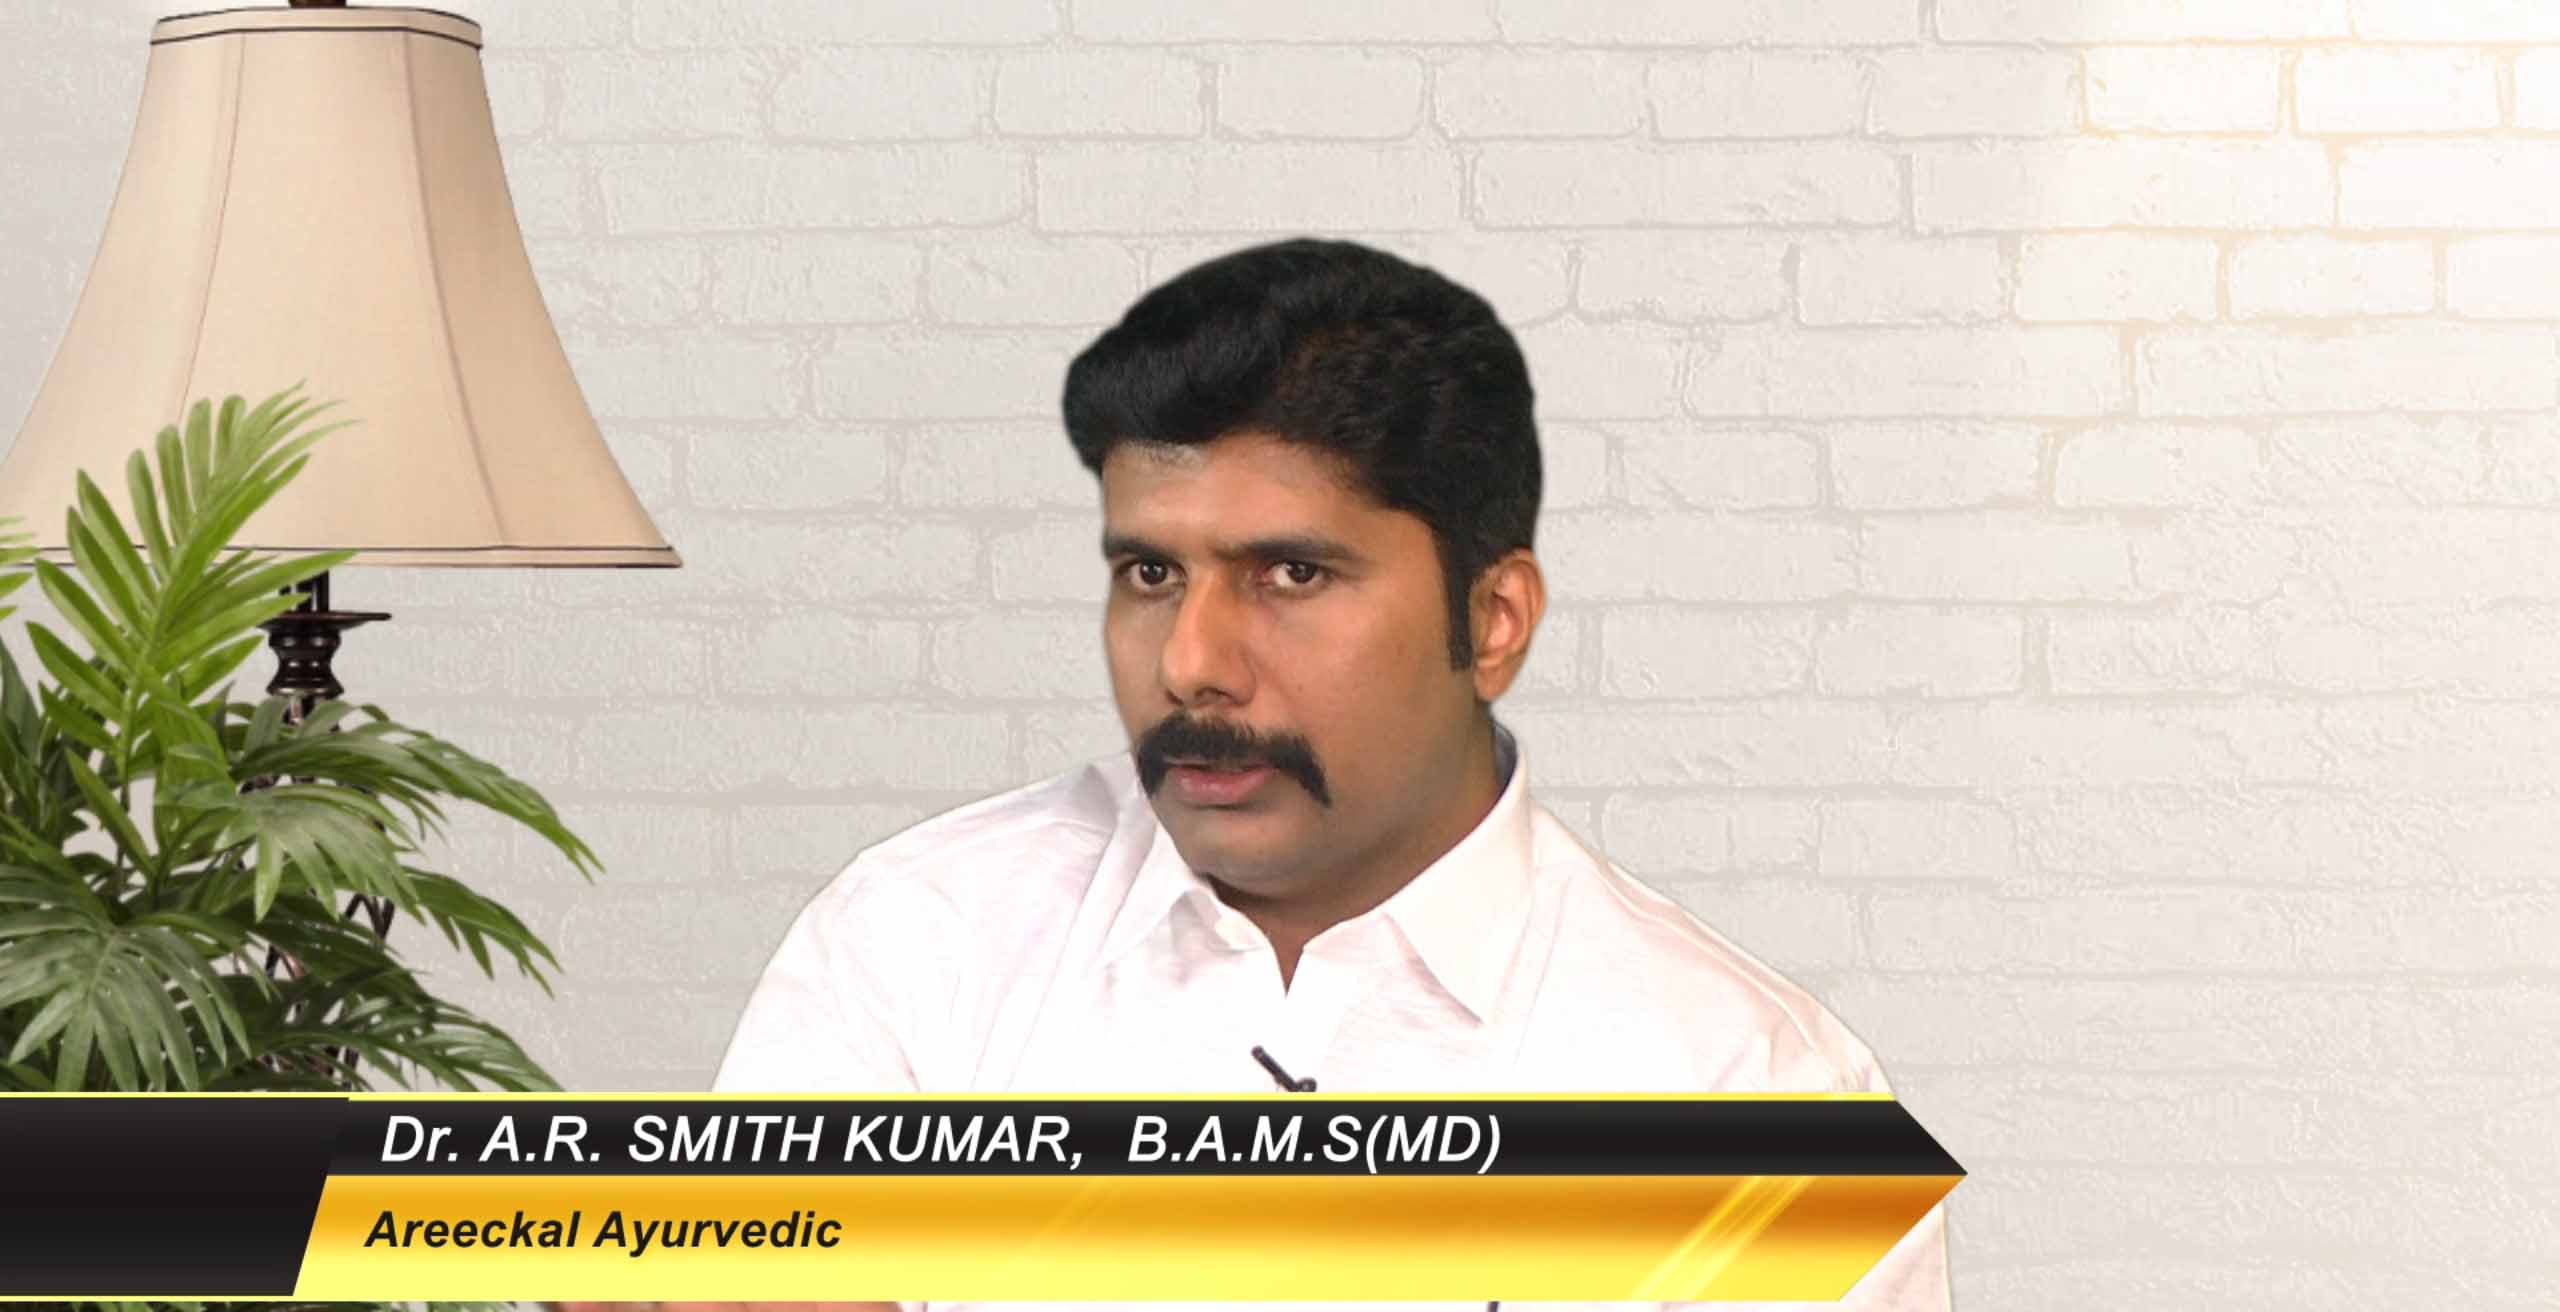 Doctors IN- Dr. A.R. Smith Kumar, B.A.M.S (M.D)